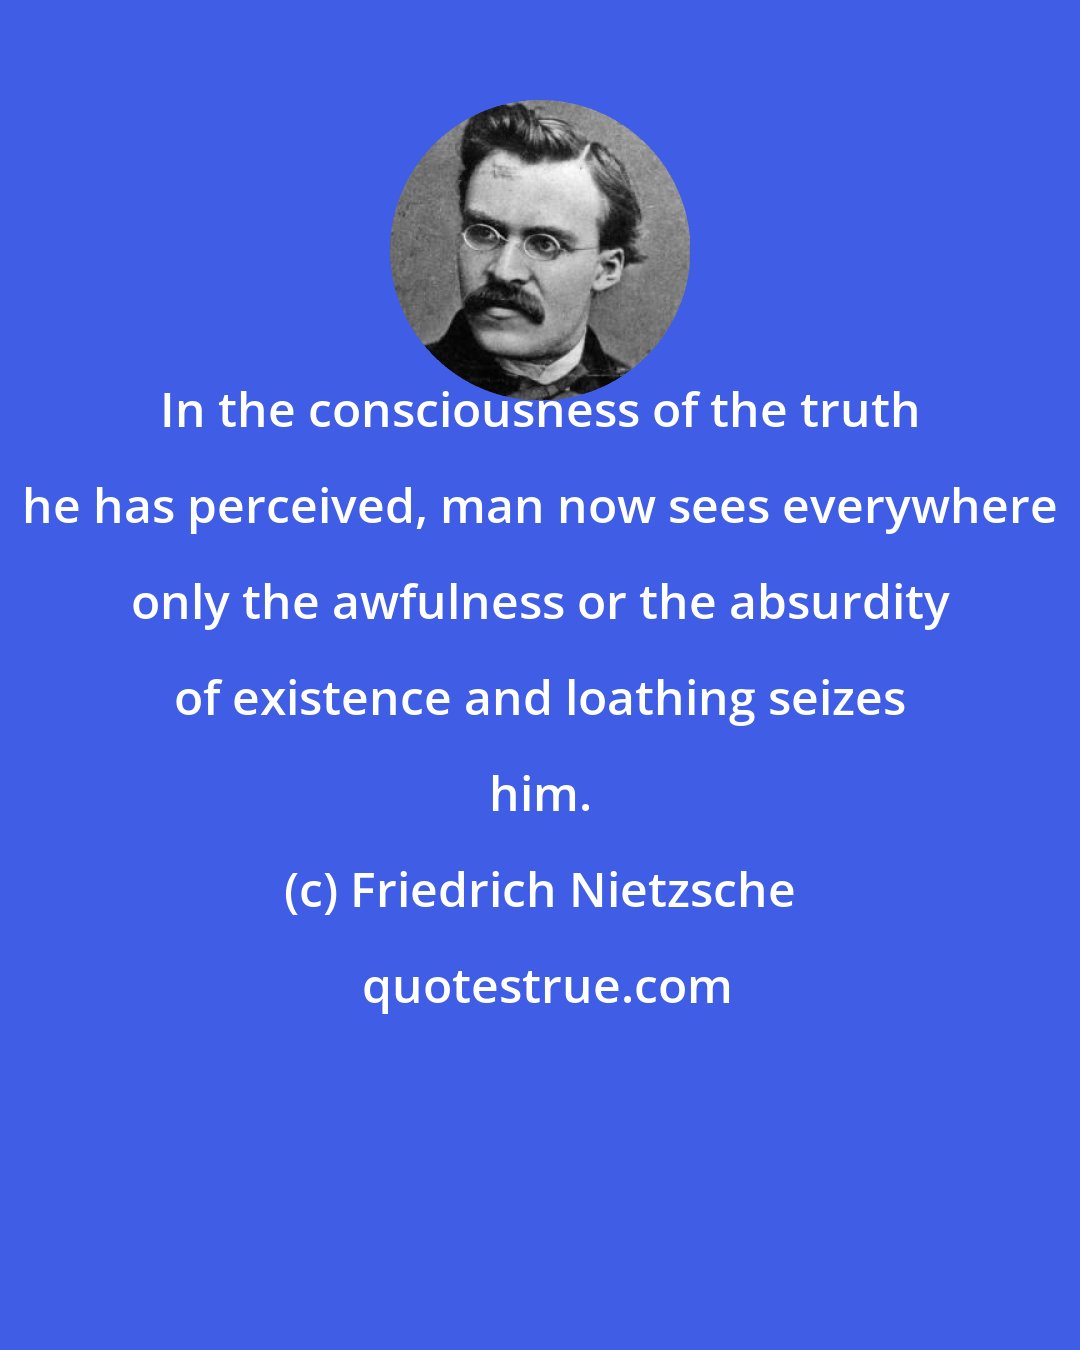 Friedrich Nietzsche: In the consciousness of the truth he has perceived, man now sees everywhere only the awfulness or the absurdity of existence and loathing seizes him.